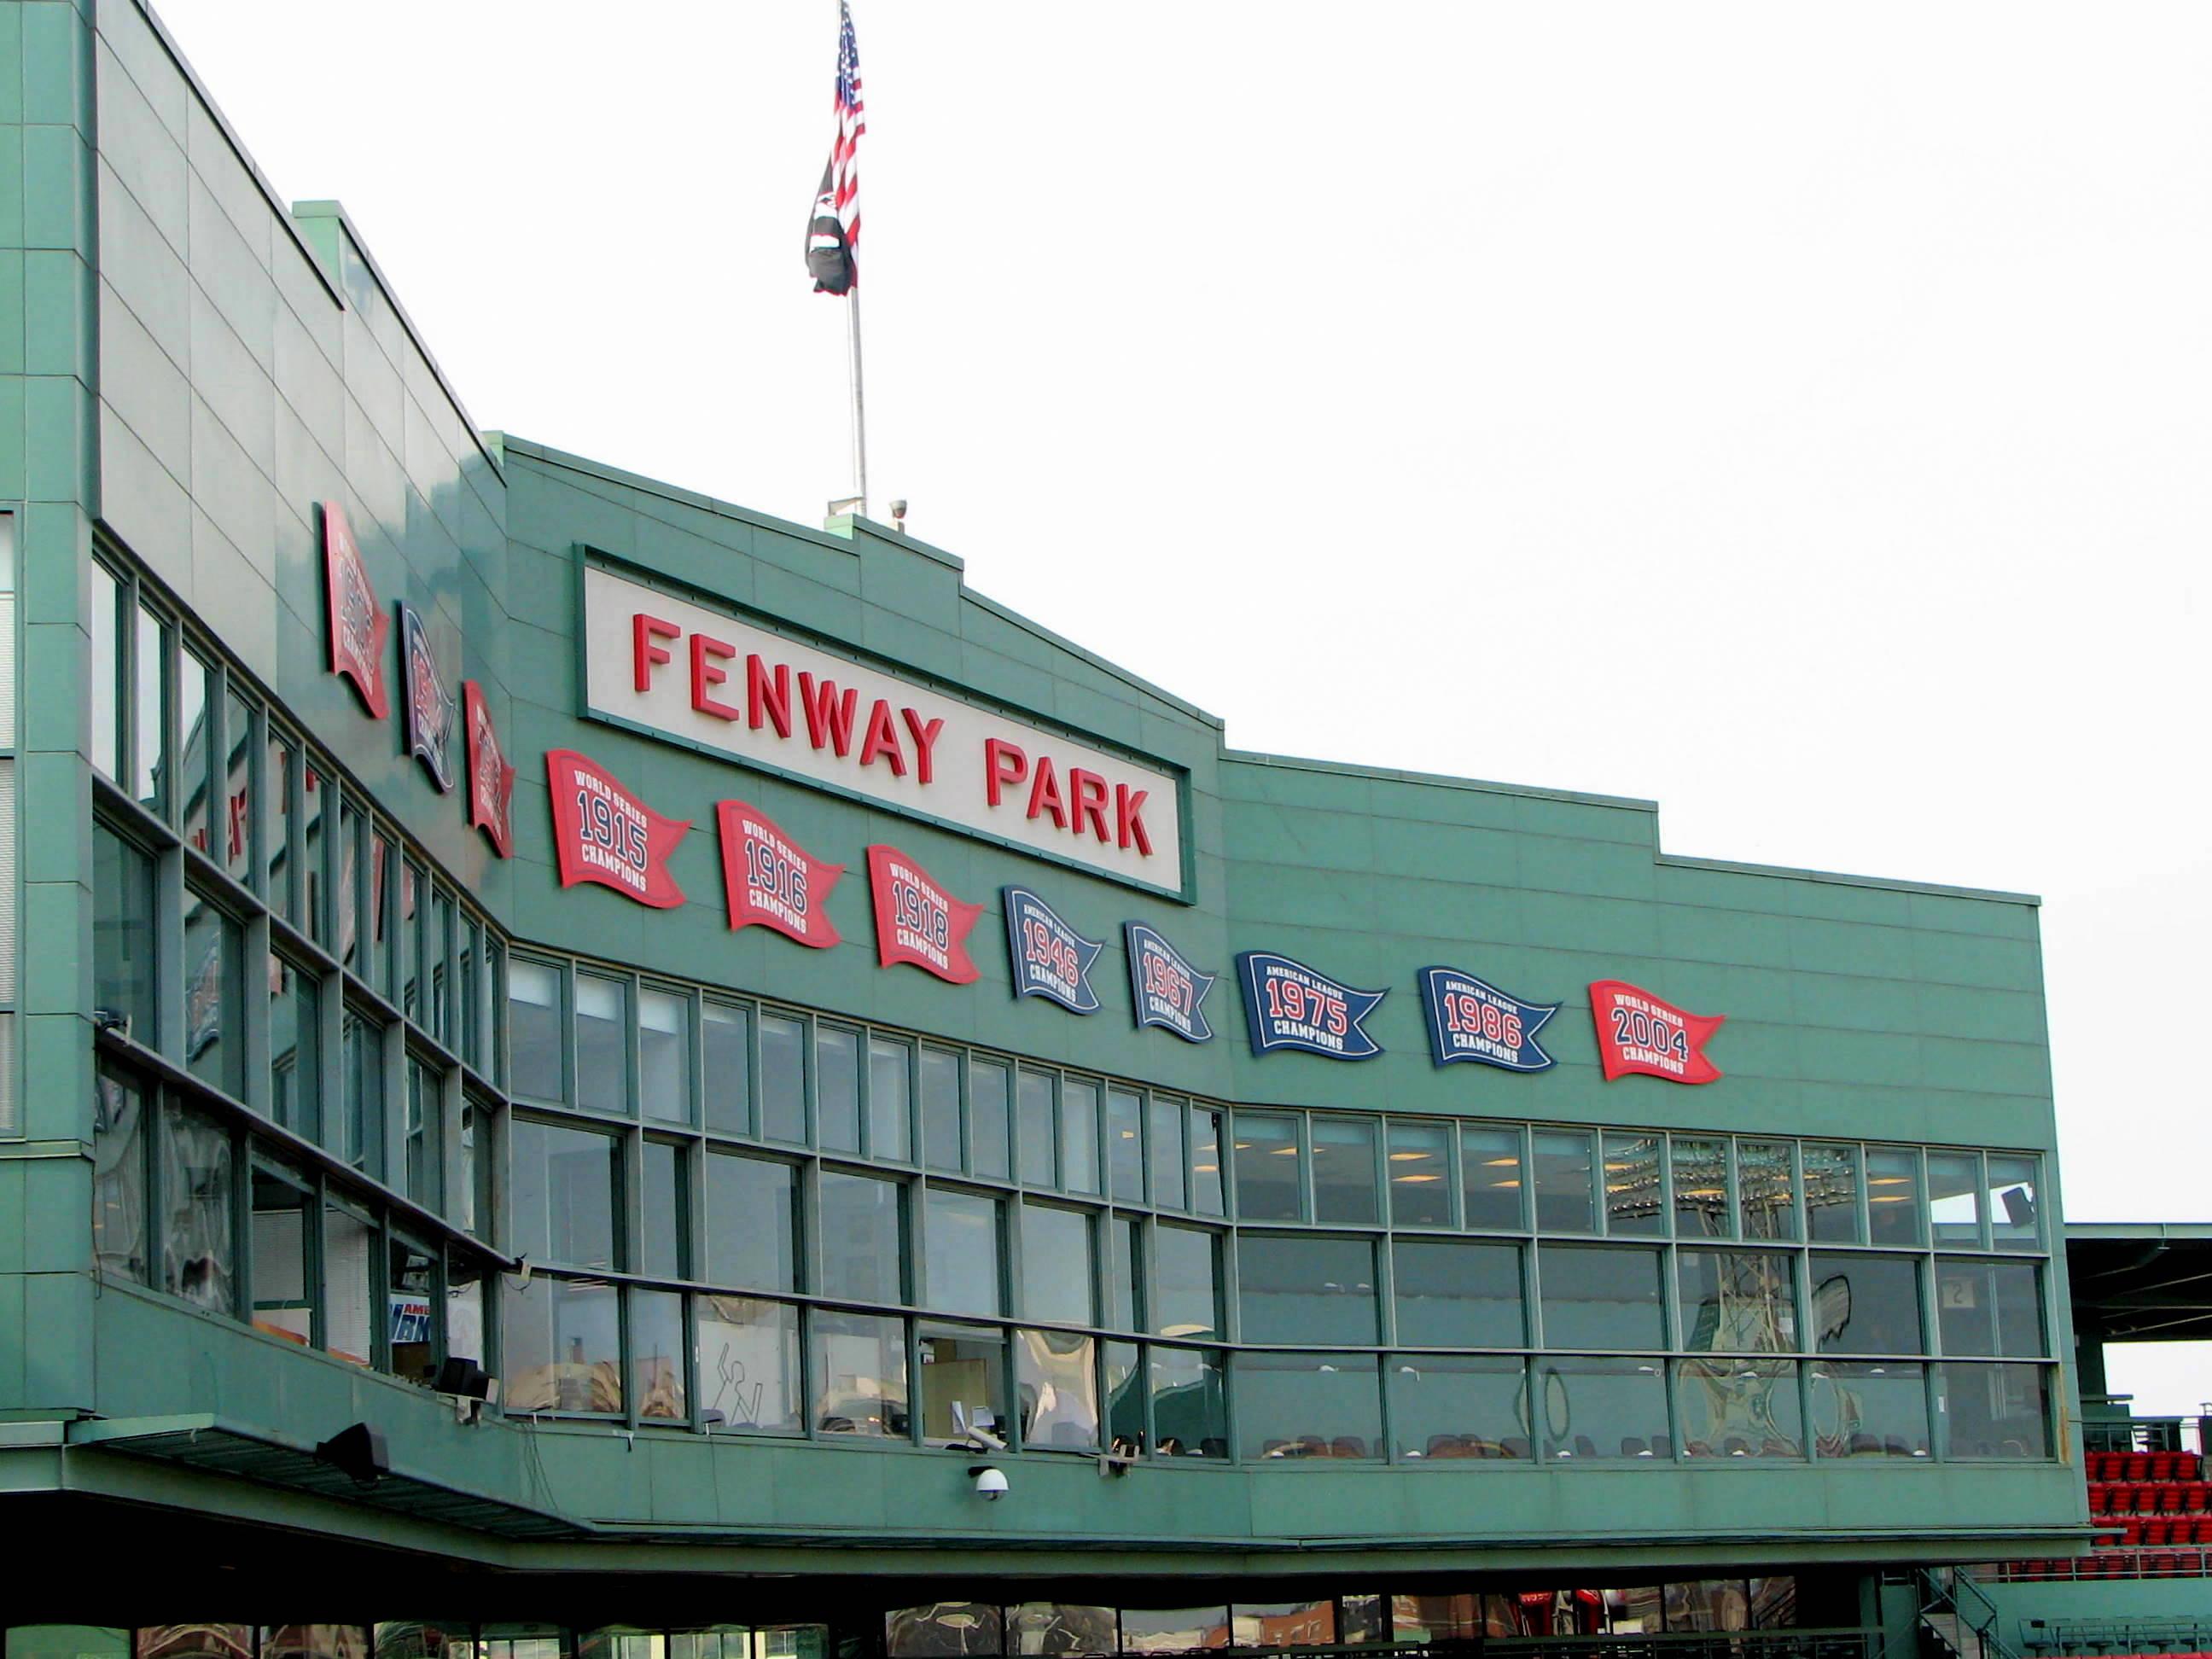 Cover image of this place Fenway Park